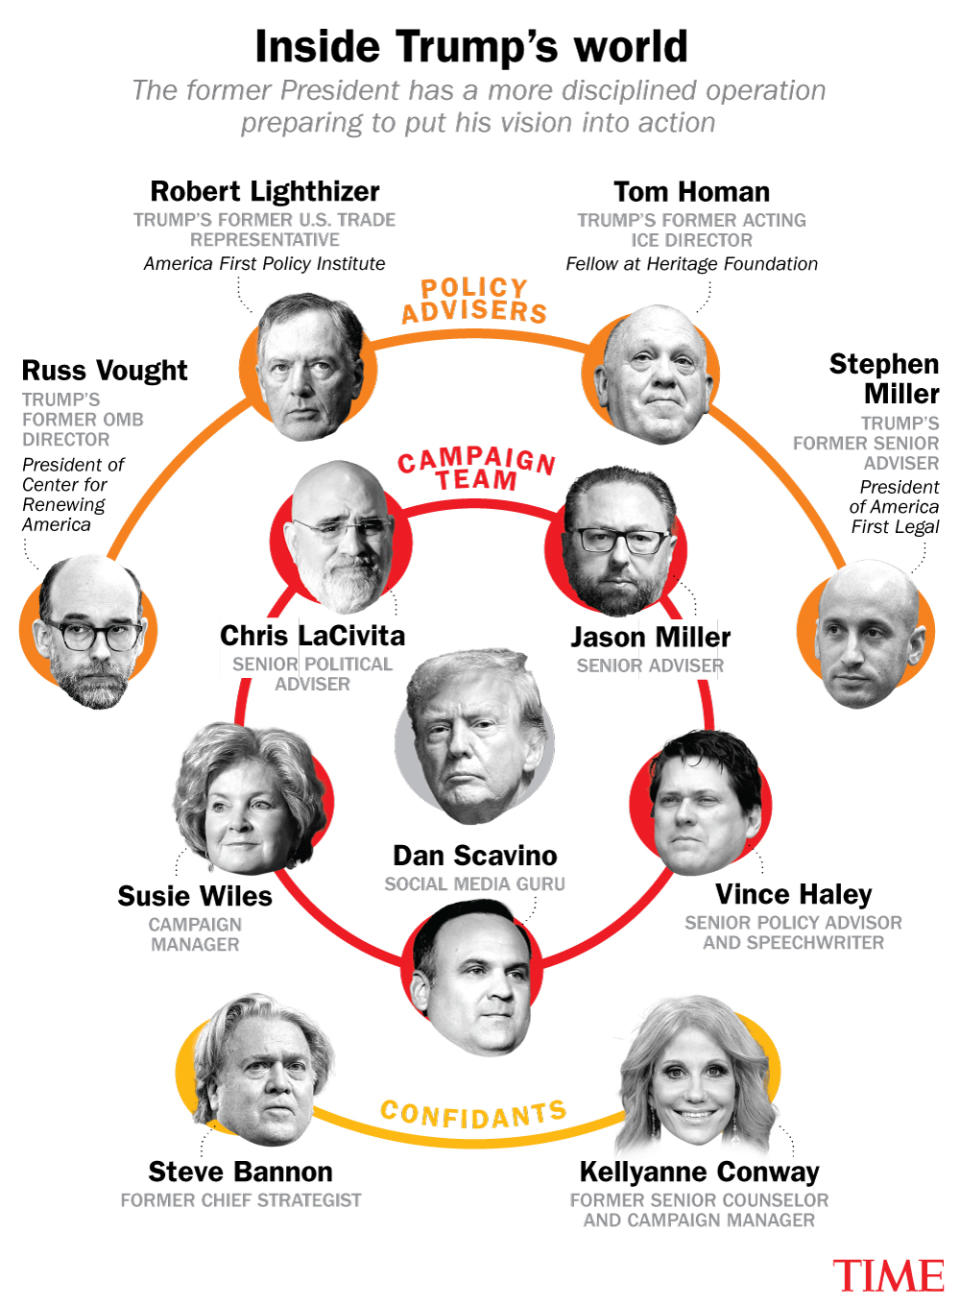 <span class="copyright">Haley, Scavino, Wiles: AP (3); Bannon, Conway, Homan, LaCivita, Lighthizer, J. Miller, S. Miller, Trump, Vought: Getty Images (9)</span>